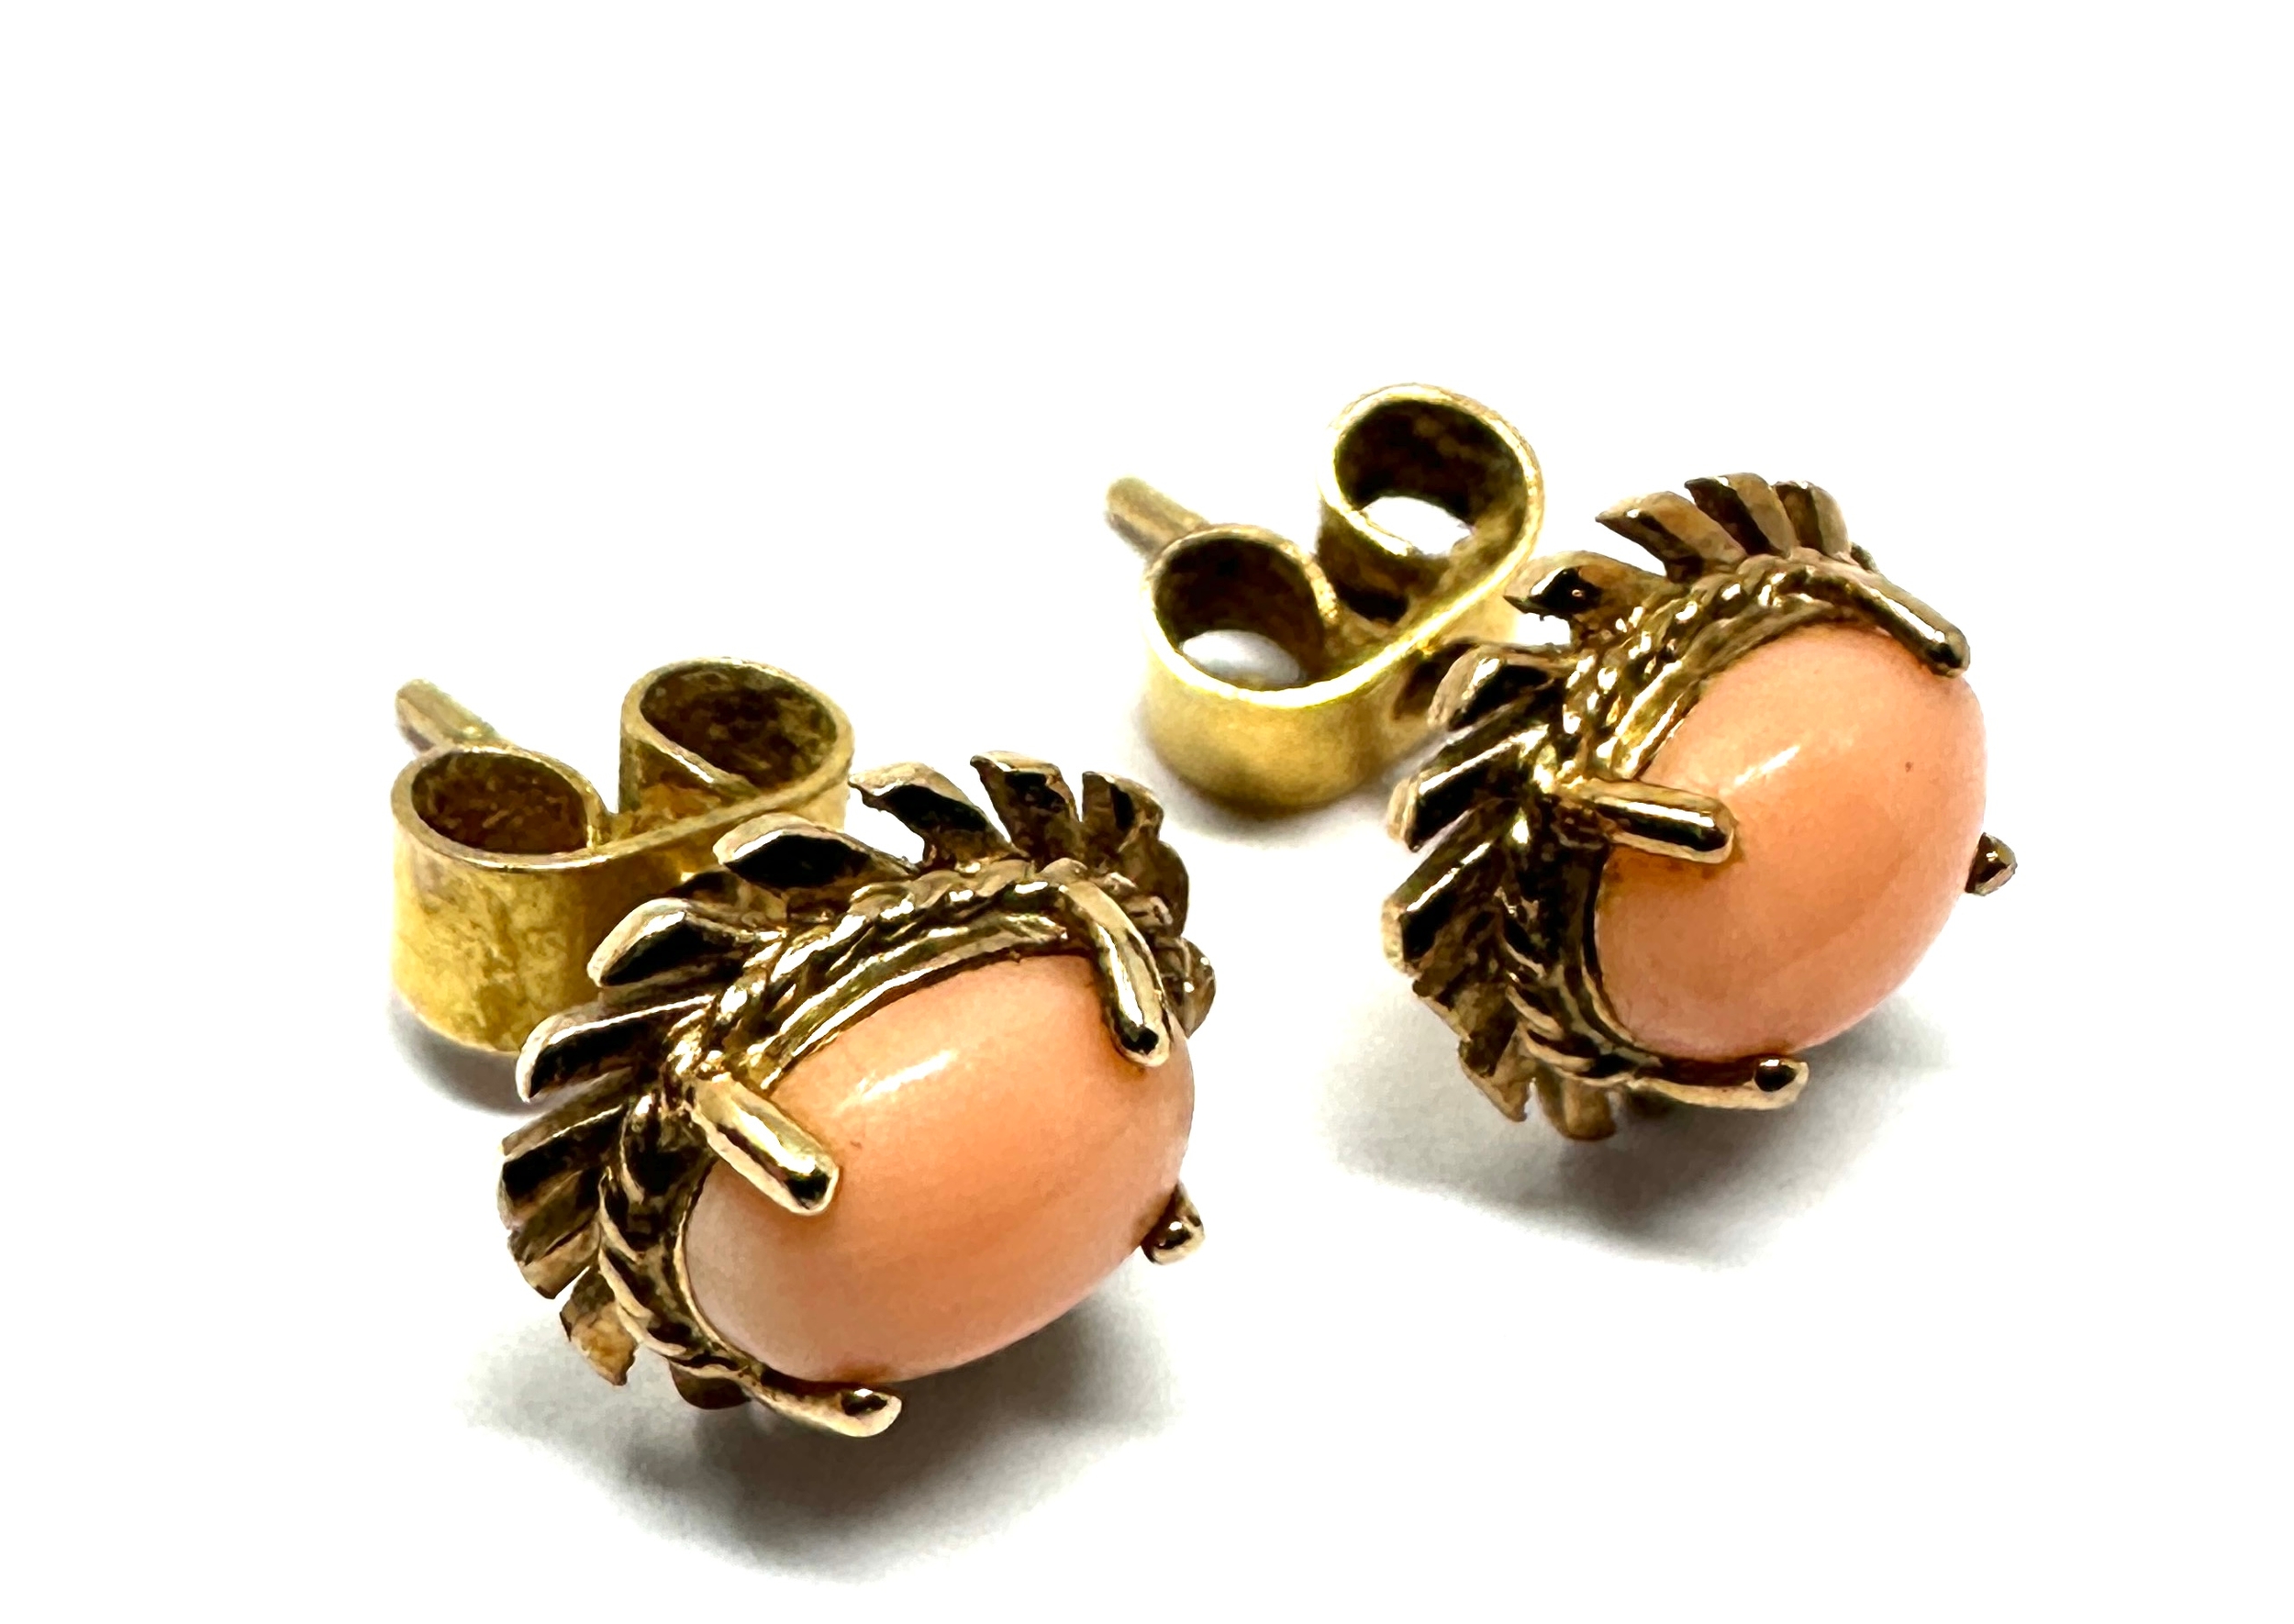 9ct gold coral earrings weight 2.1g - Image 2 of 3